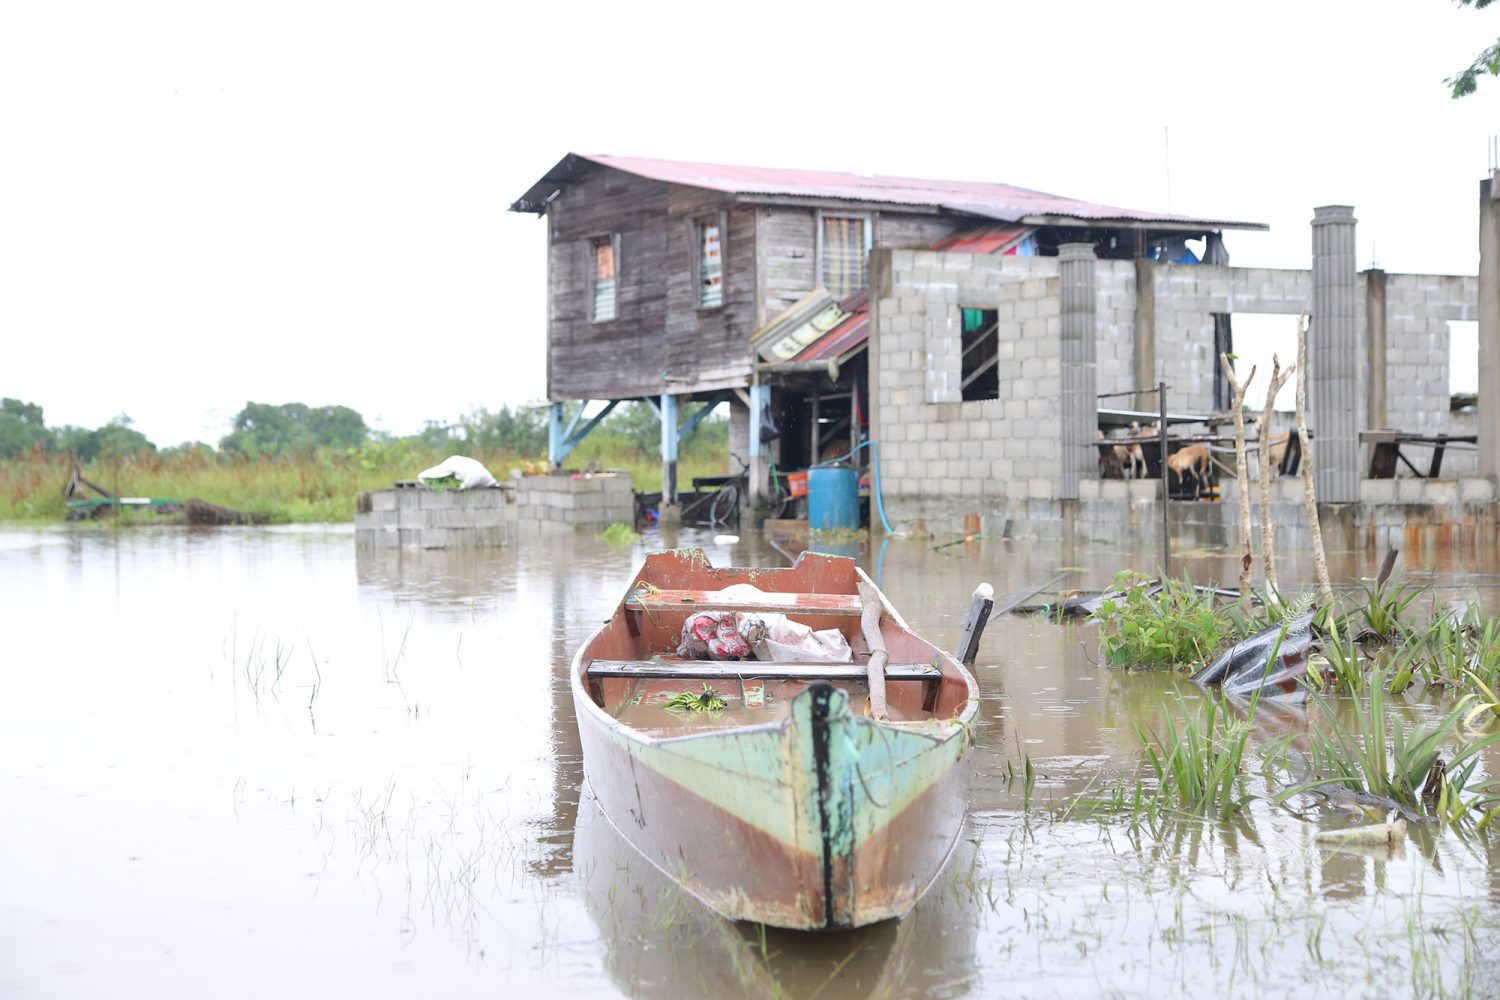 A boat in proximity to one of the flooded homes in the area on Friday (Keno George photo)